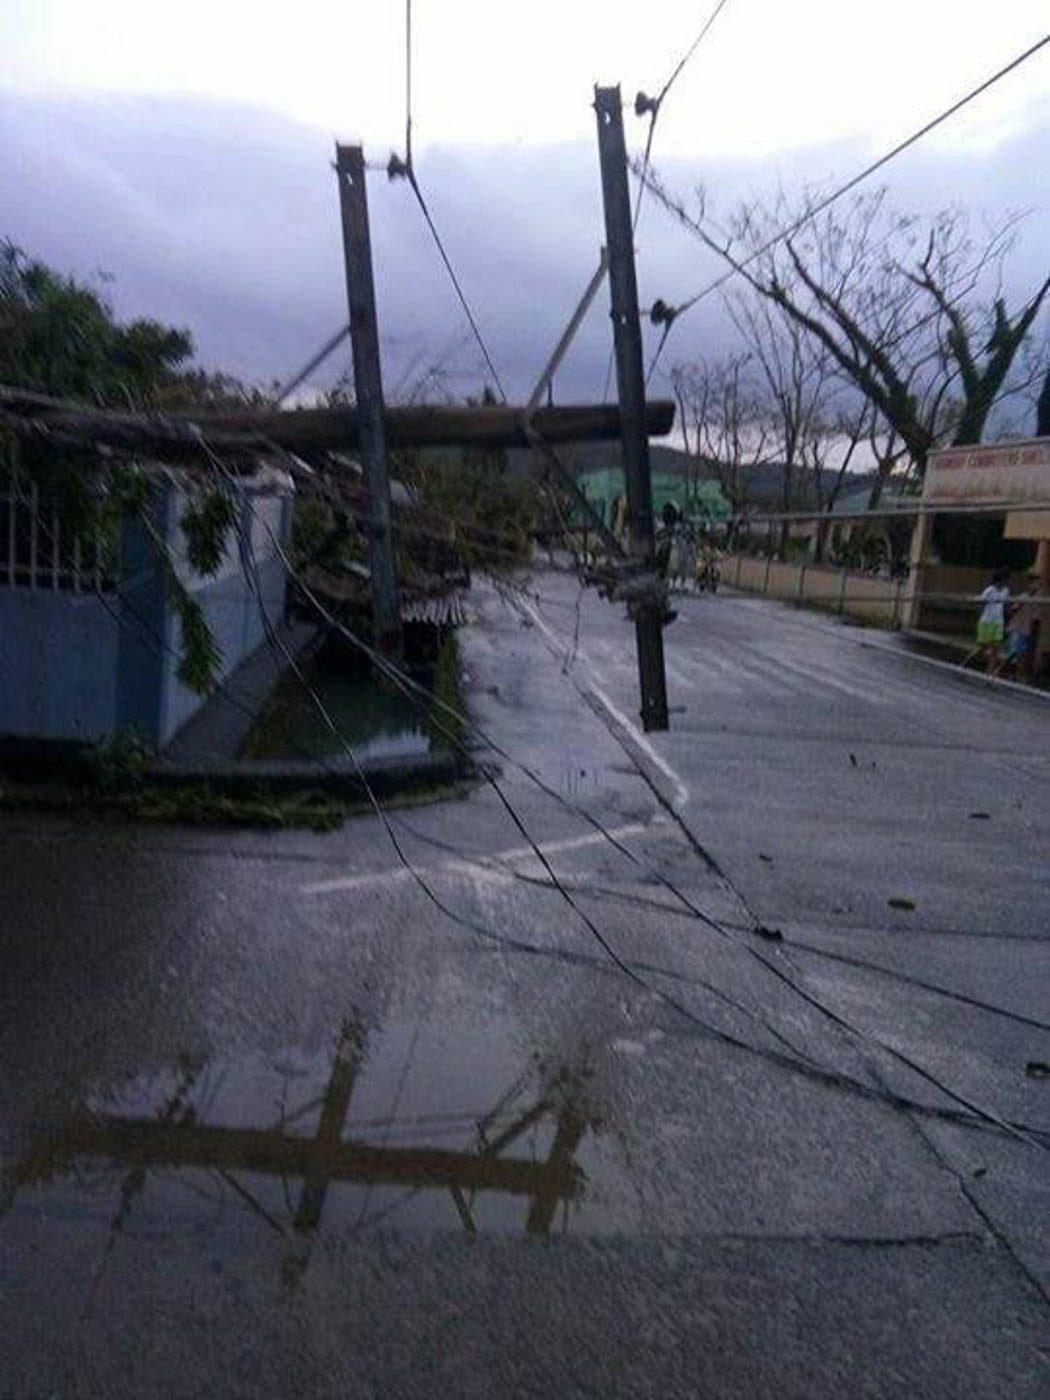 #NinaPH: Telco services down in parts of Southern Luzon